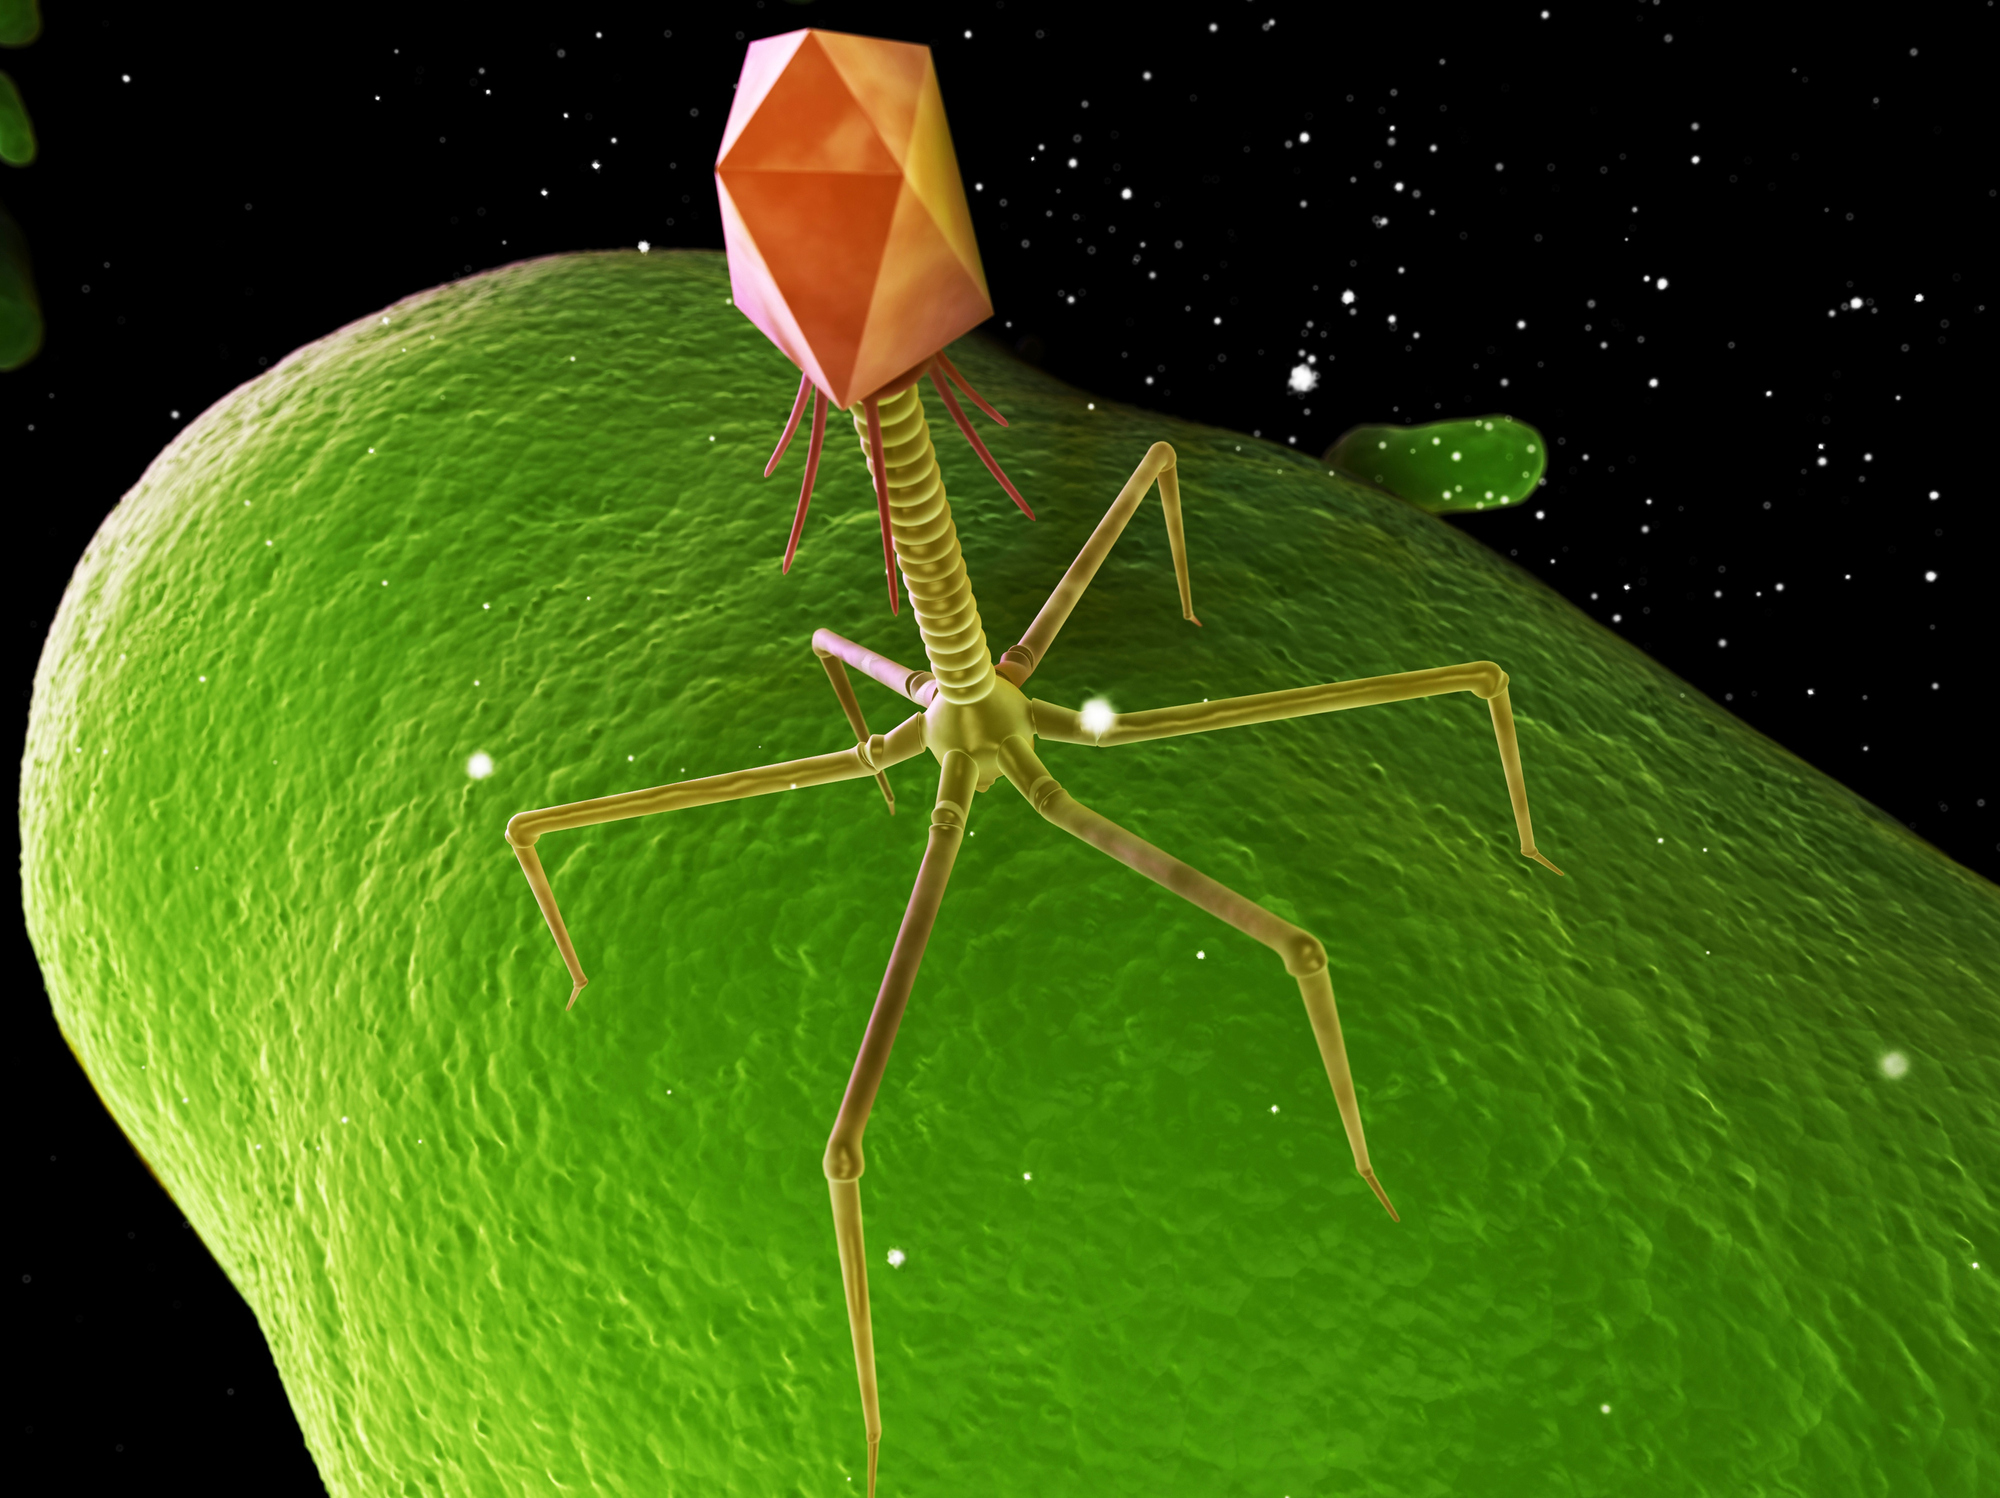 Phage getty images